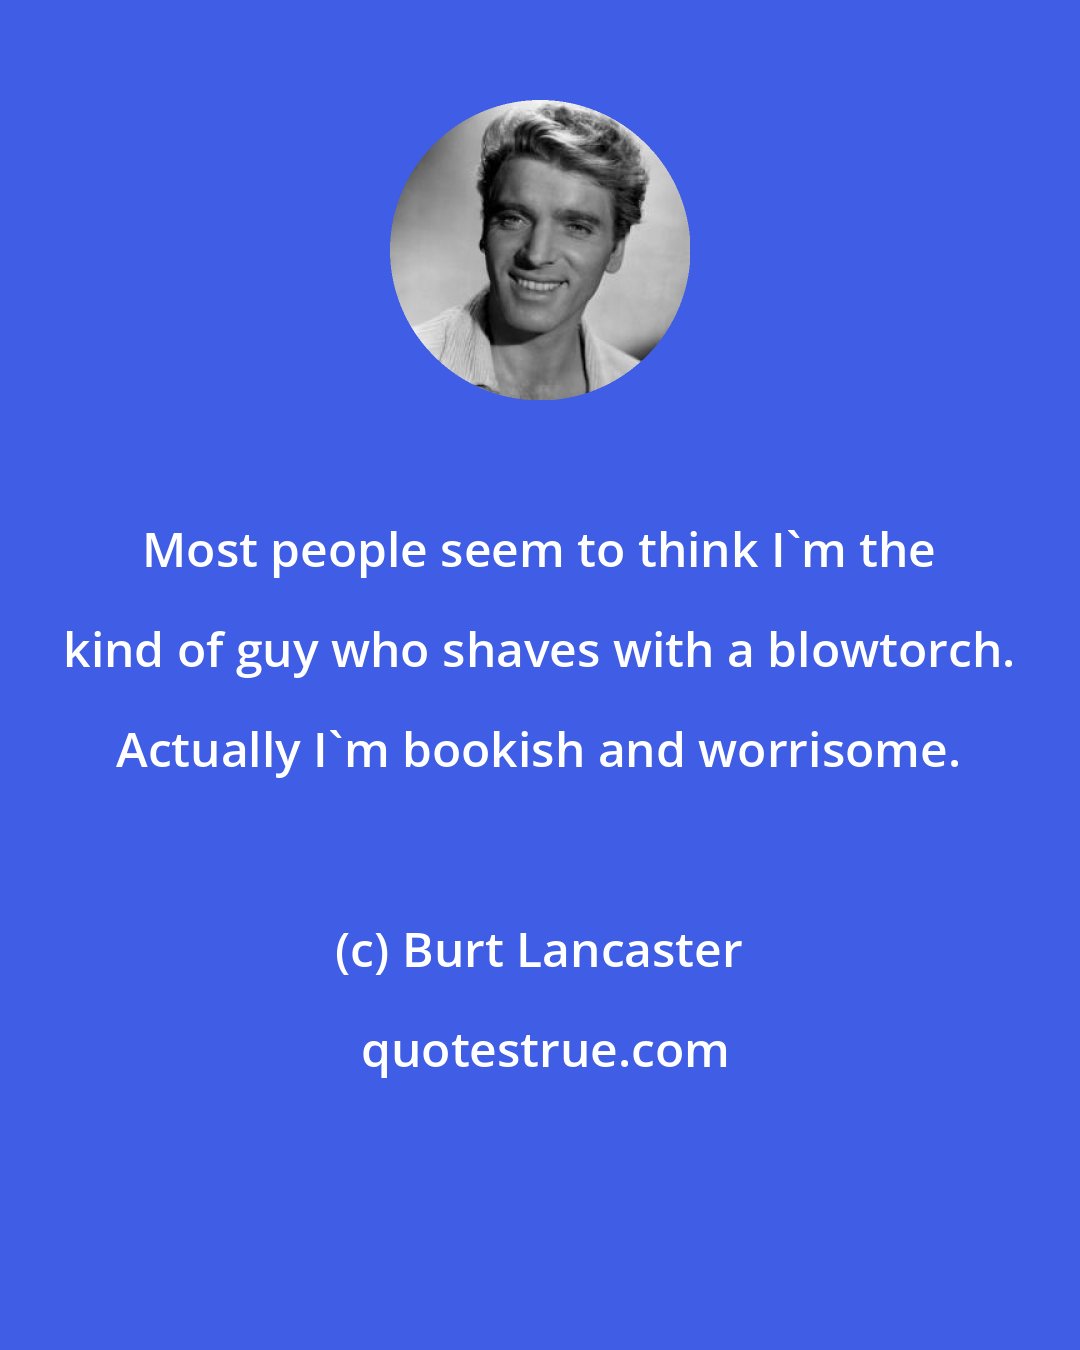 Burt Lancaster: Most people seem to think I'm the kind of guy who shaves with a blowtorch. Actually I'm bookish and worrisome.